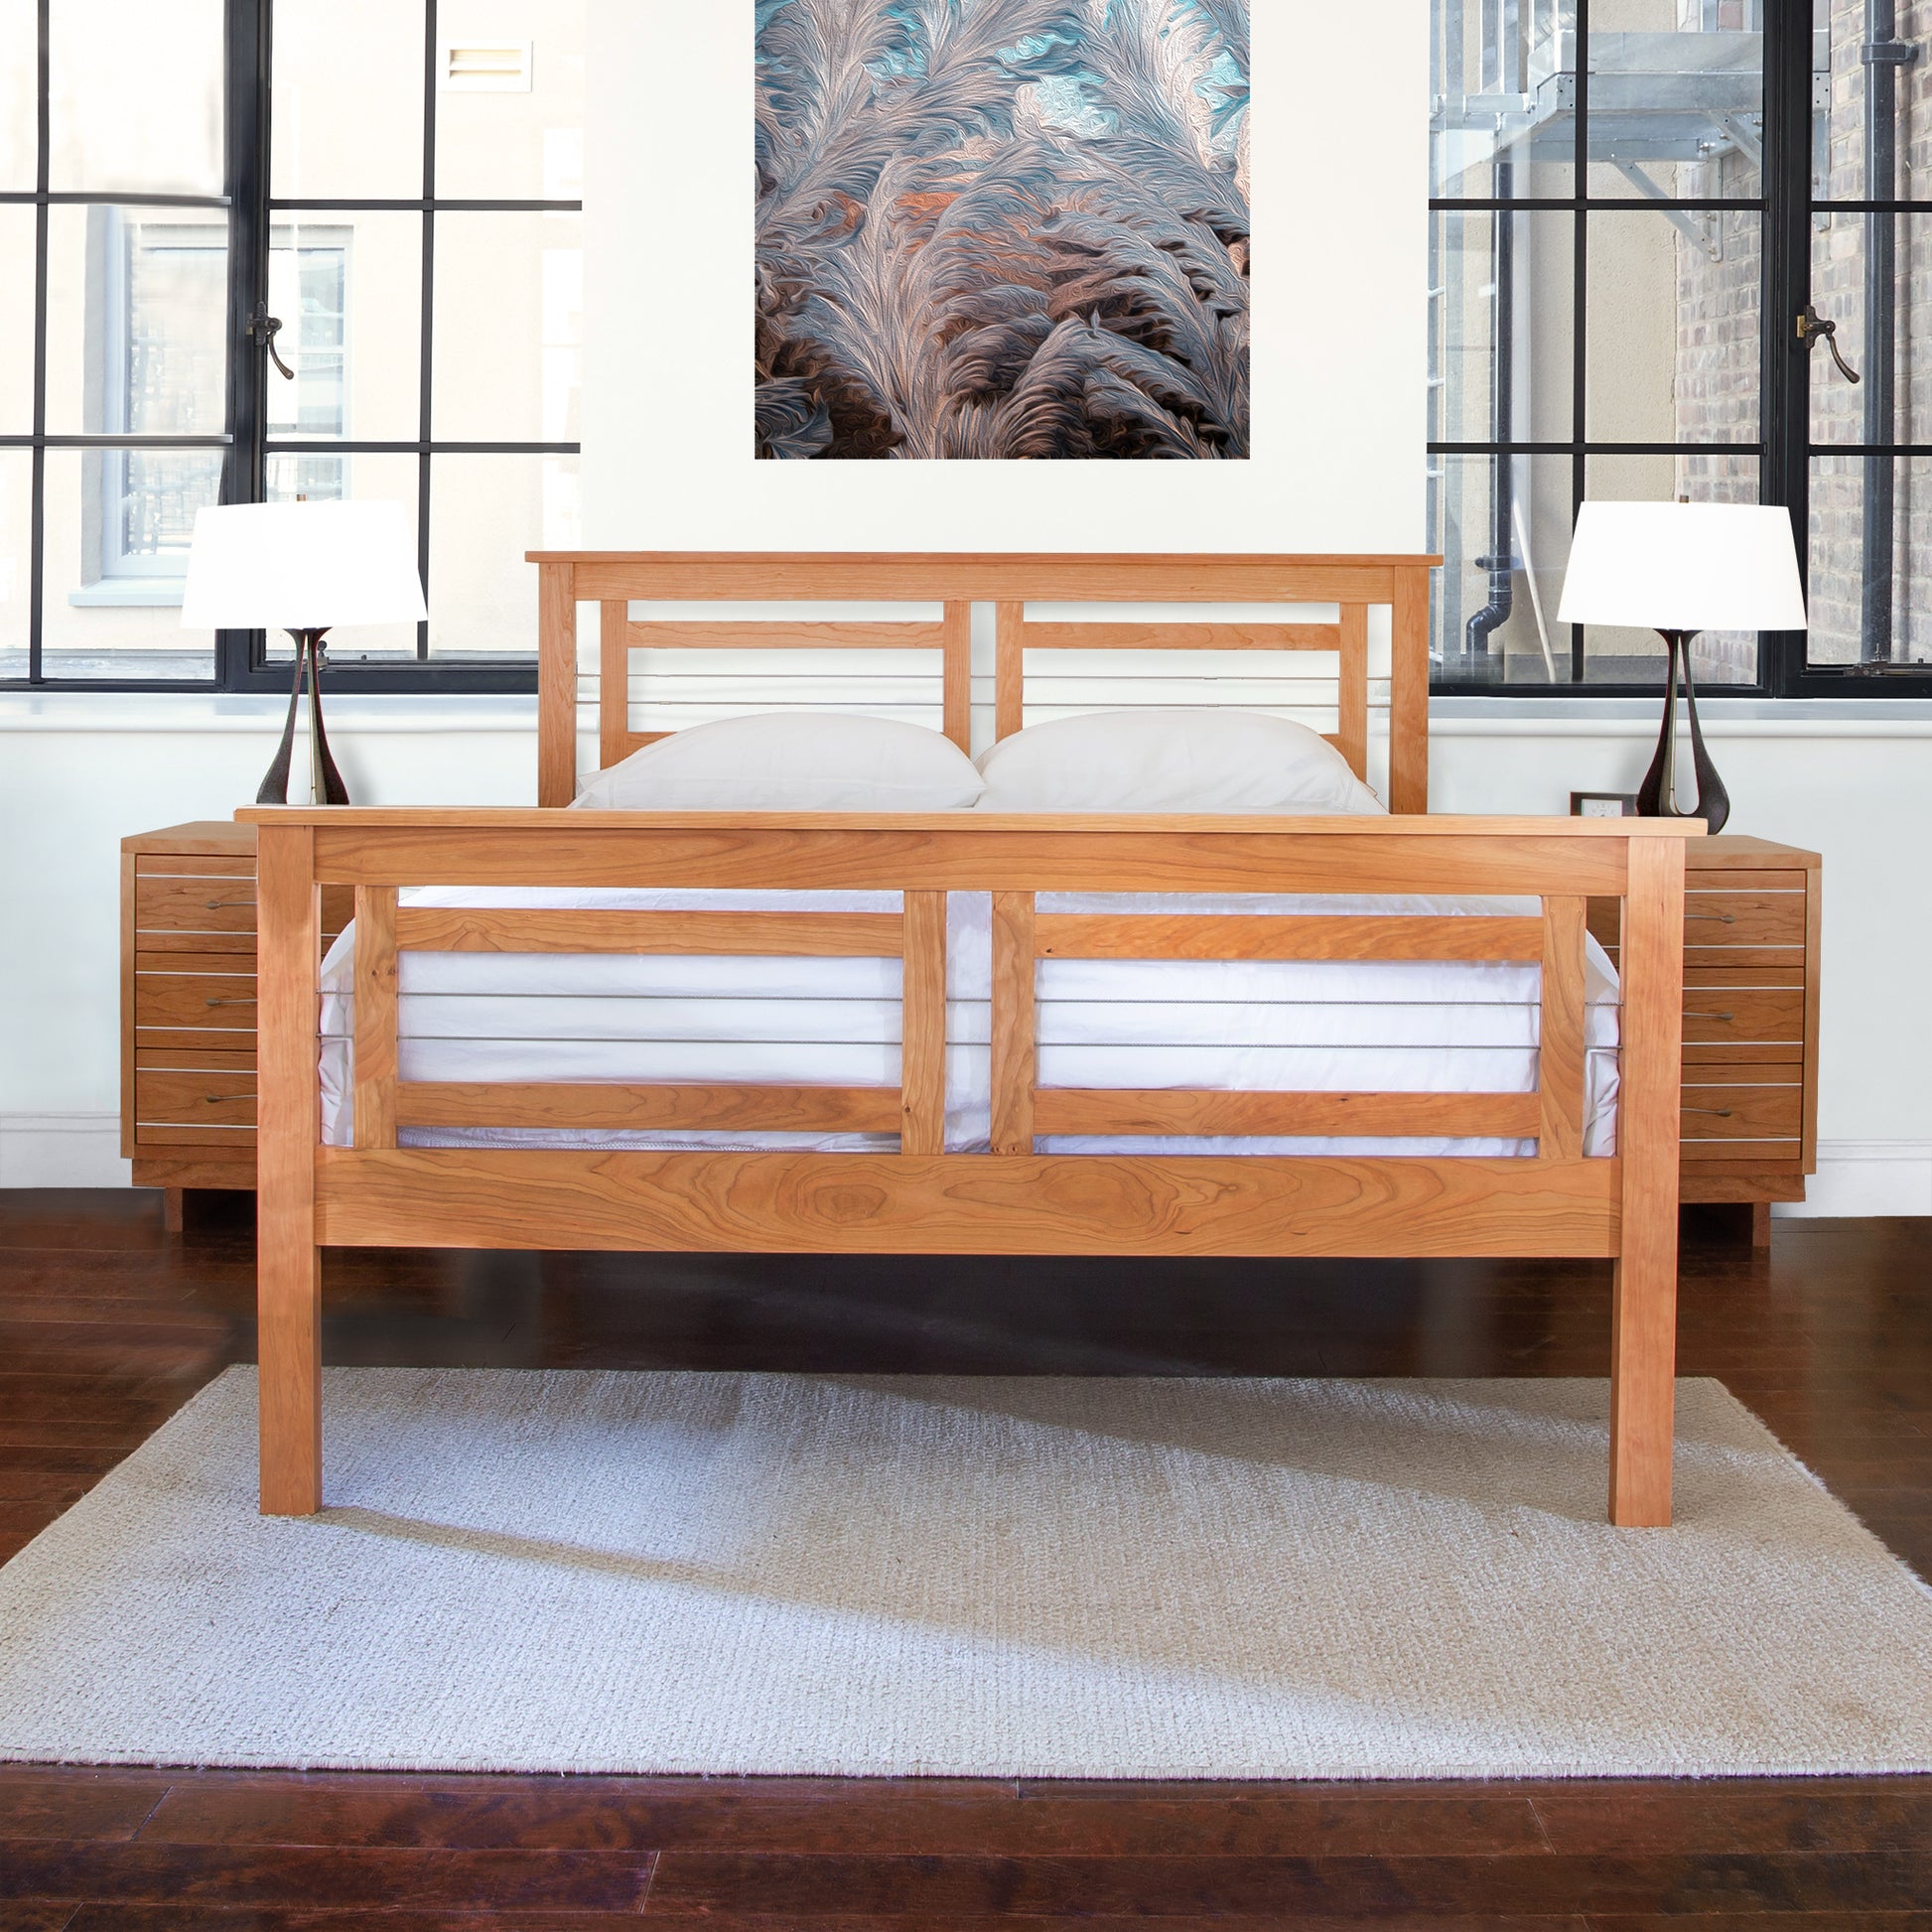 A solid hardwood construction bed frame with white bedding is situated on a cream rug in a room with large windows and a framed abstract wall art above the Vermont Furniture Designs Contemporary Cable Bed.